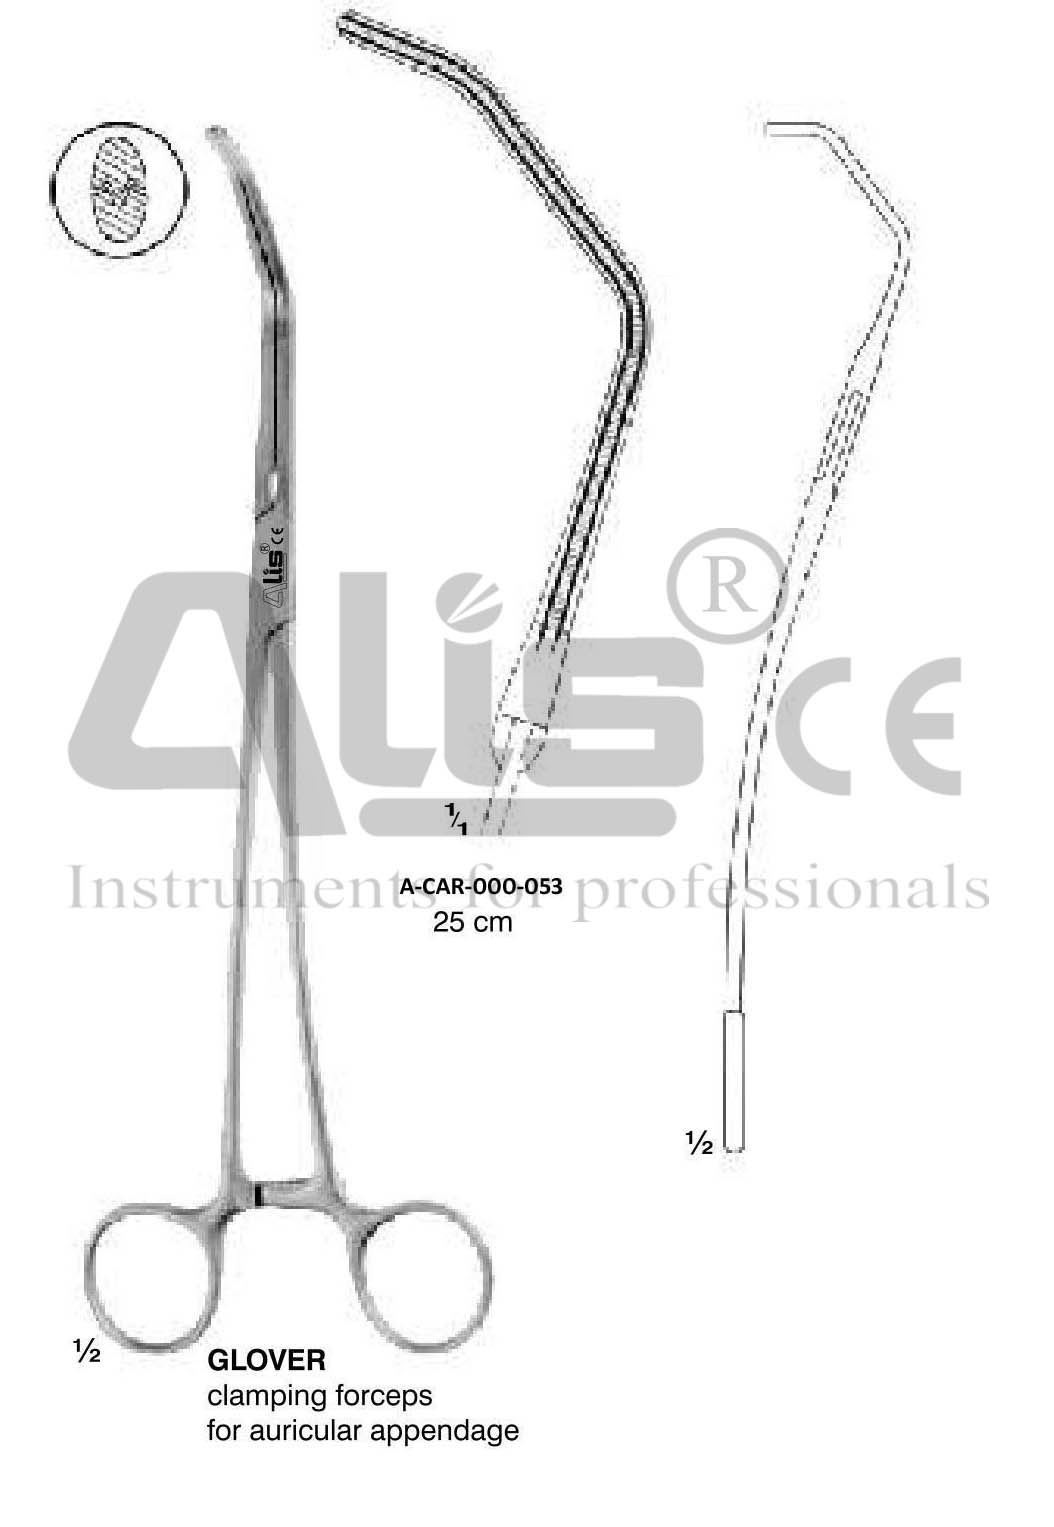 GLOVER CLAMPING FORCEPS FOR AURICULAR APPENDAGE